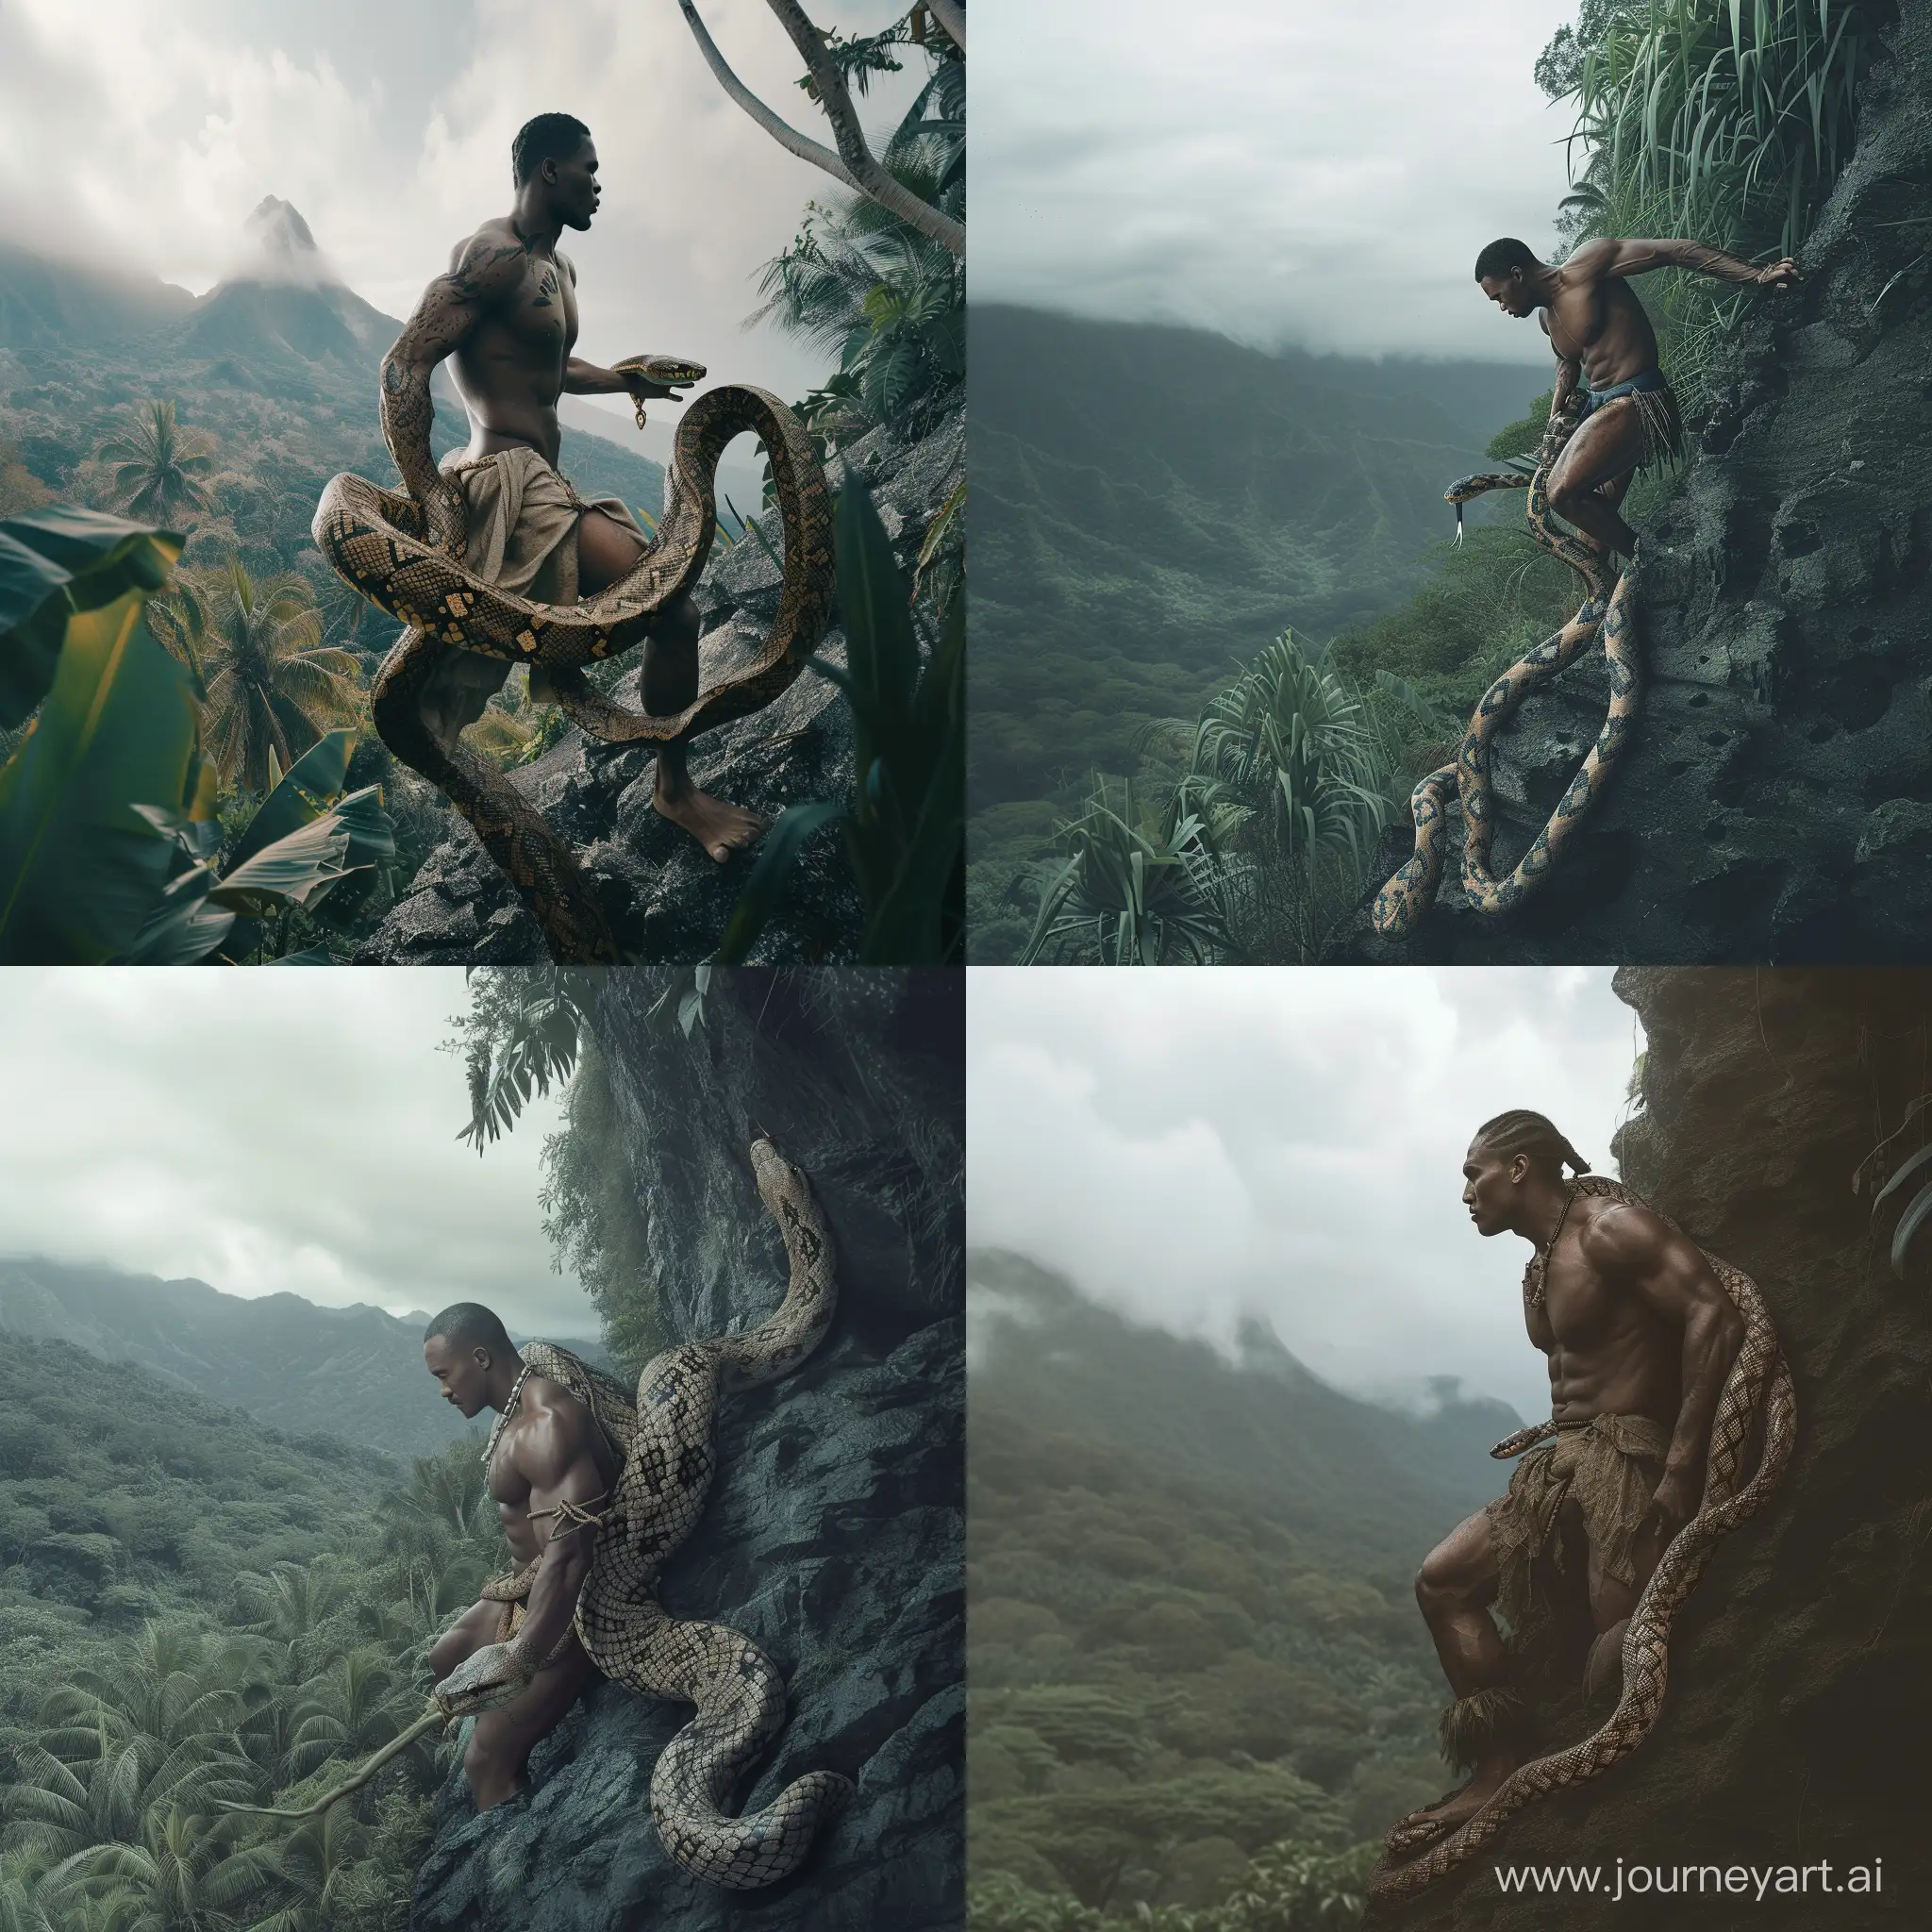 Fijian-Man-with-Giant-Snake-Lower-Body-Emerges-from-Mountain-Top-in-Cinematic-Horror-Scene